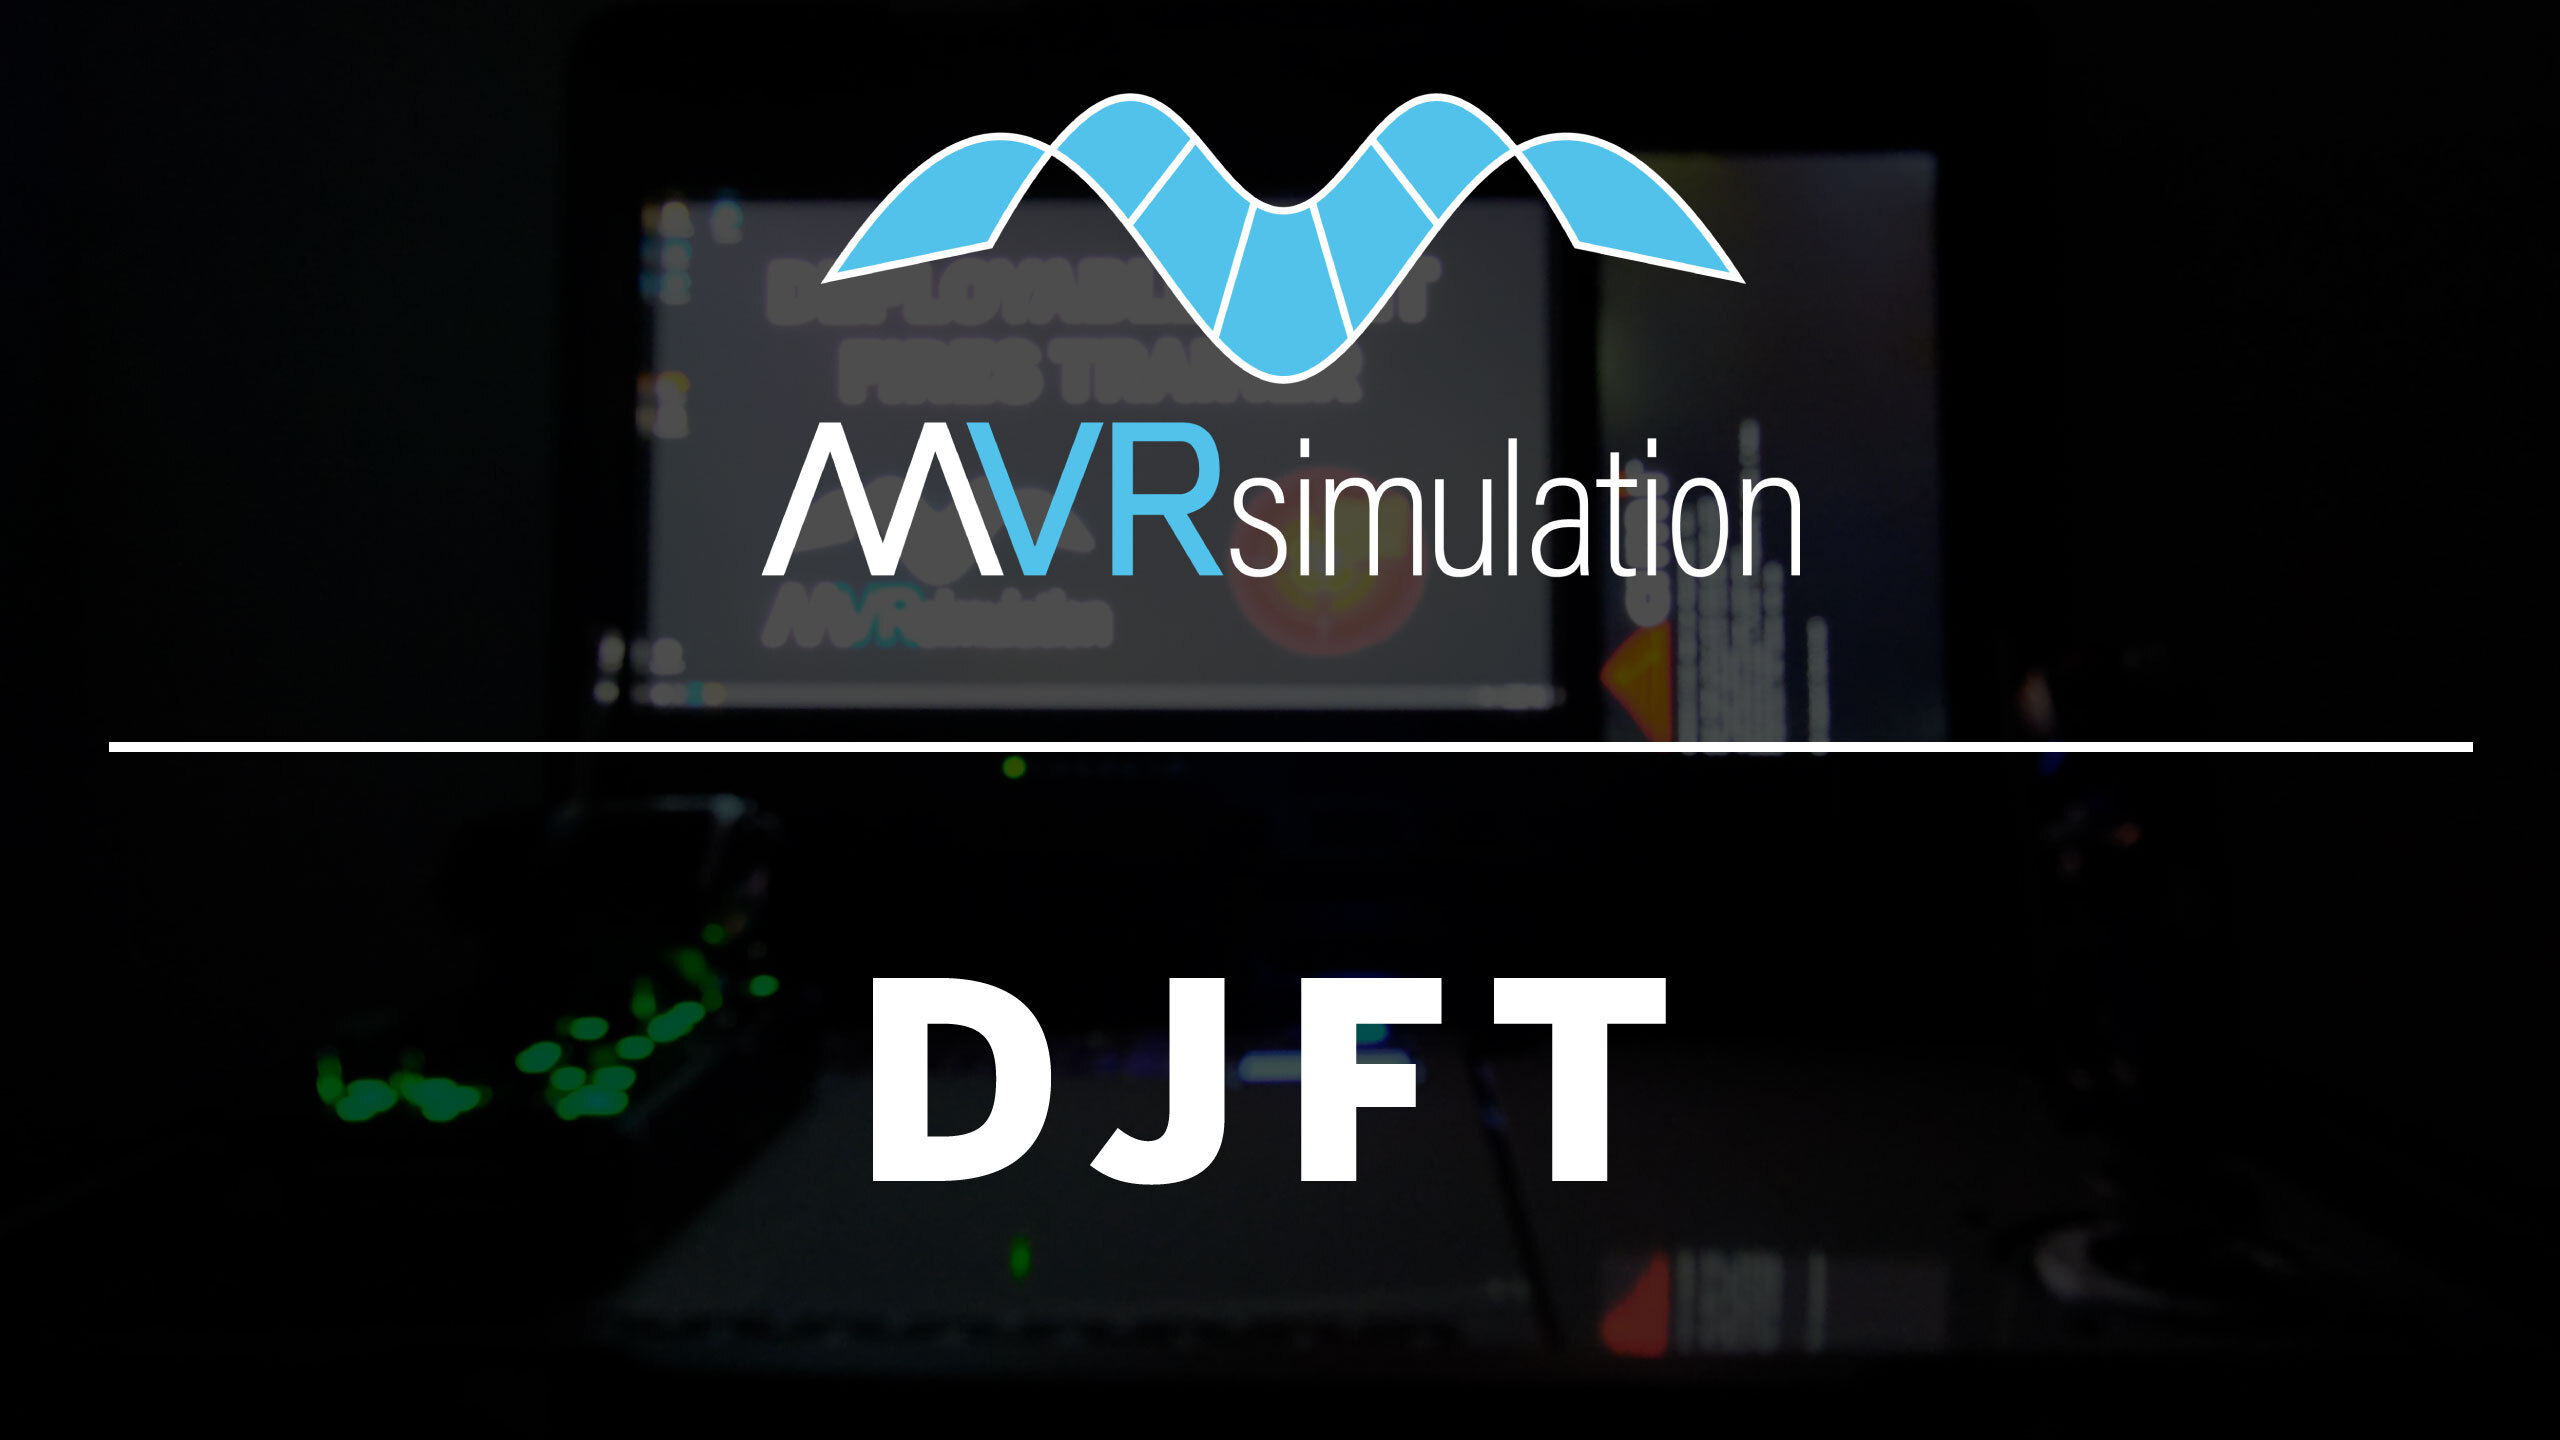 Mixed-reality DJFT with Digitally Aided CAS - fully accredited by the JFS ESC